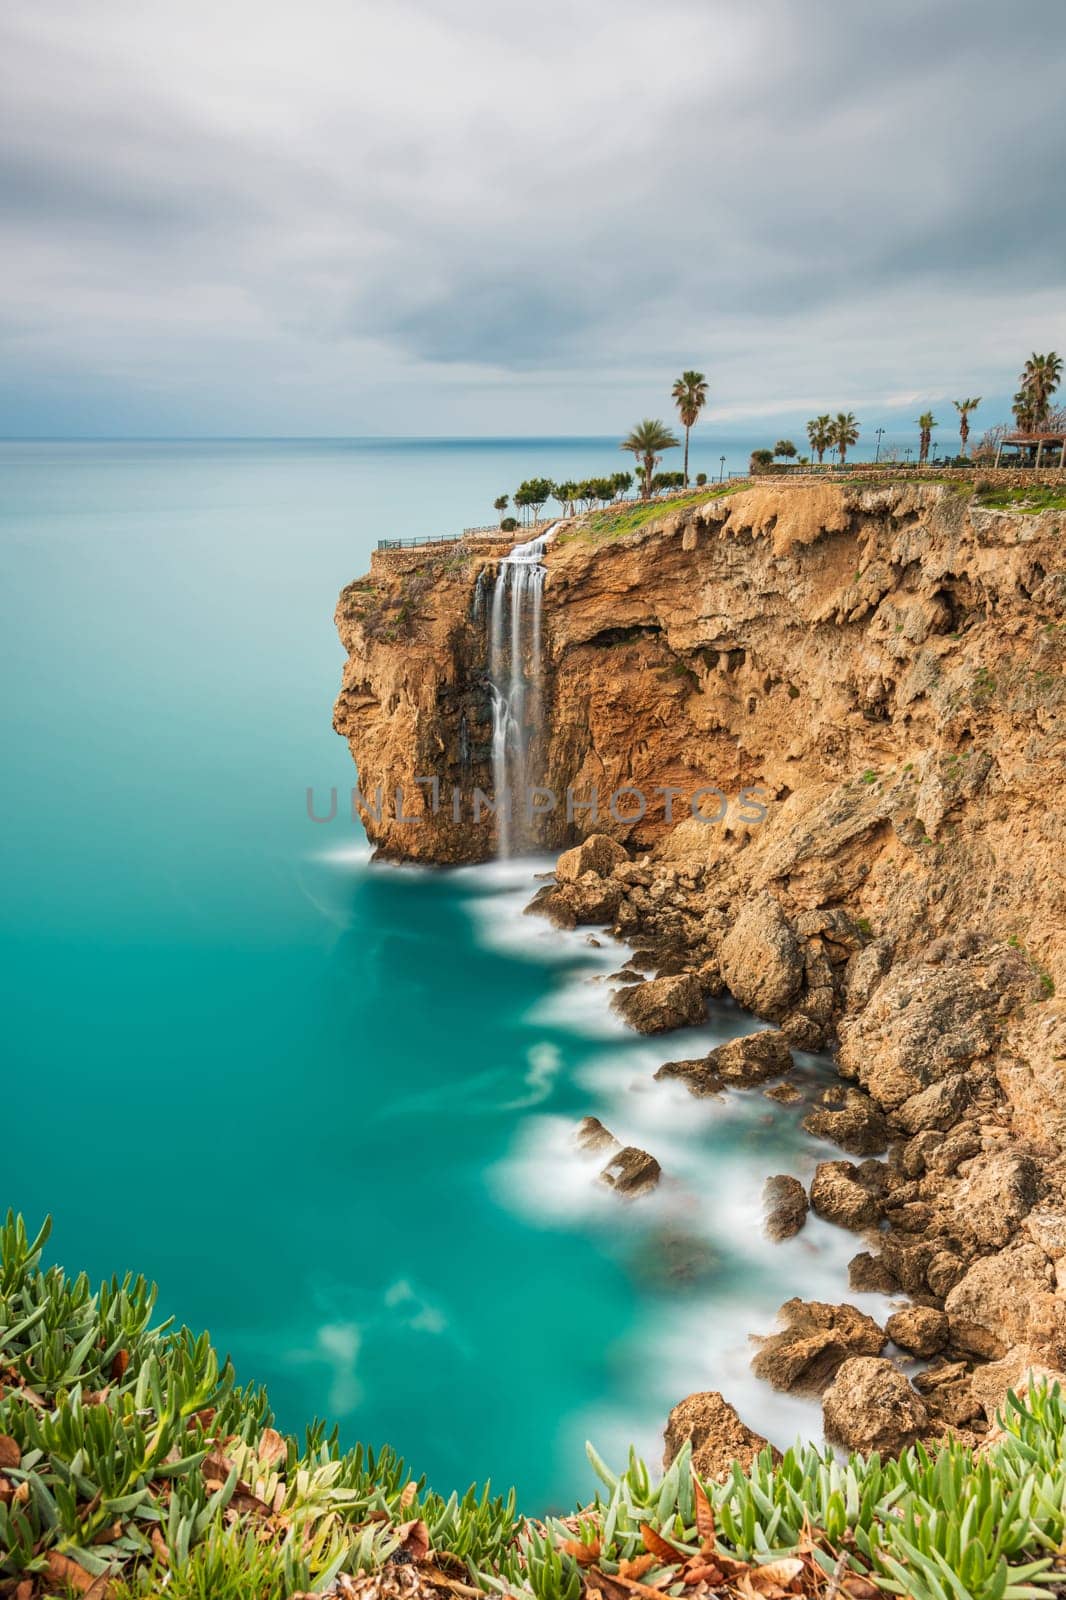 Long exposure image of the waterfall falling from the cliffs into the sea in Fener, Antalya by Sonat